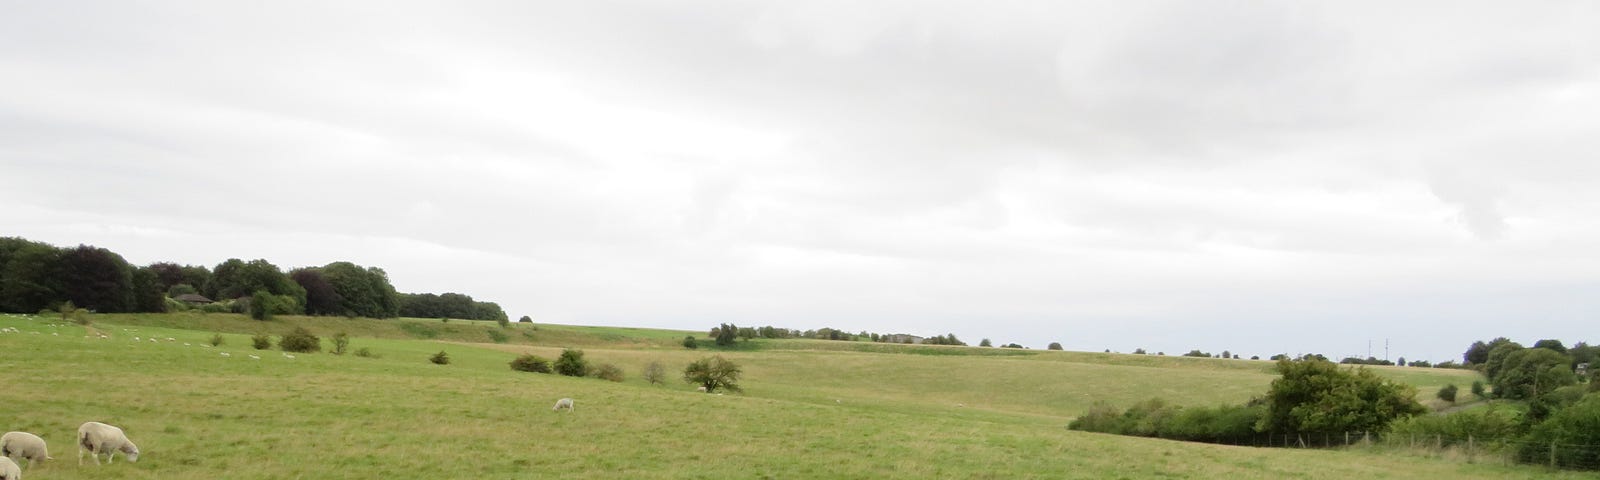 Durrington Walls, Stonehenge landscape in Wiltshire. The ring in the grassland shows about half the size of the henge enclosure.